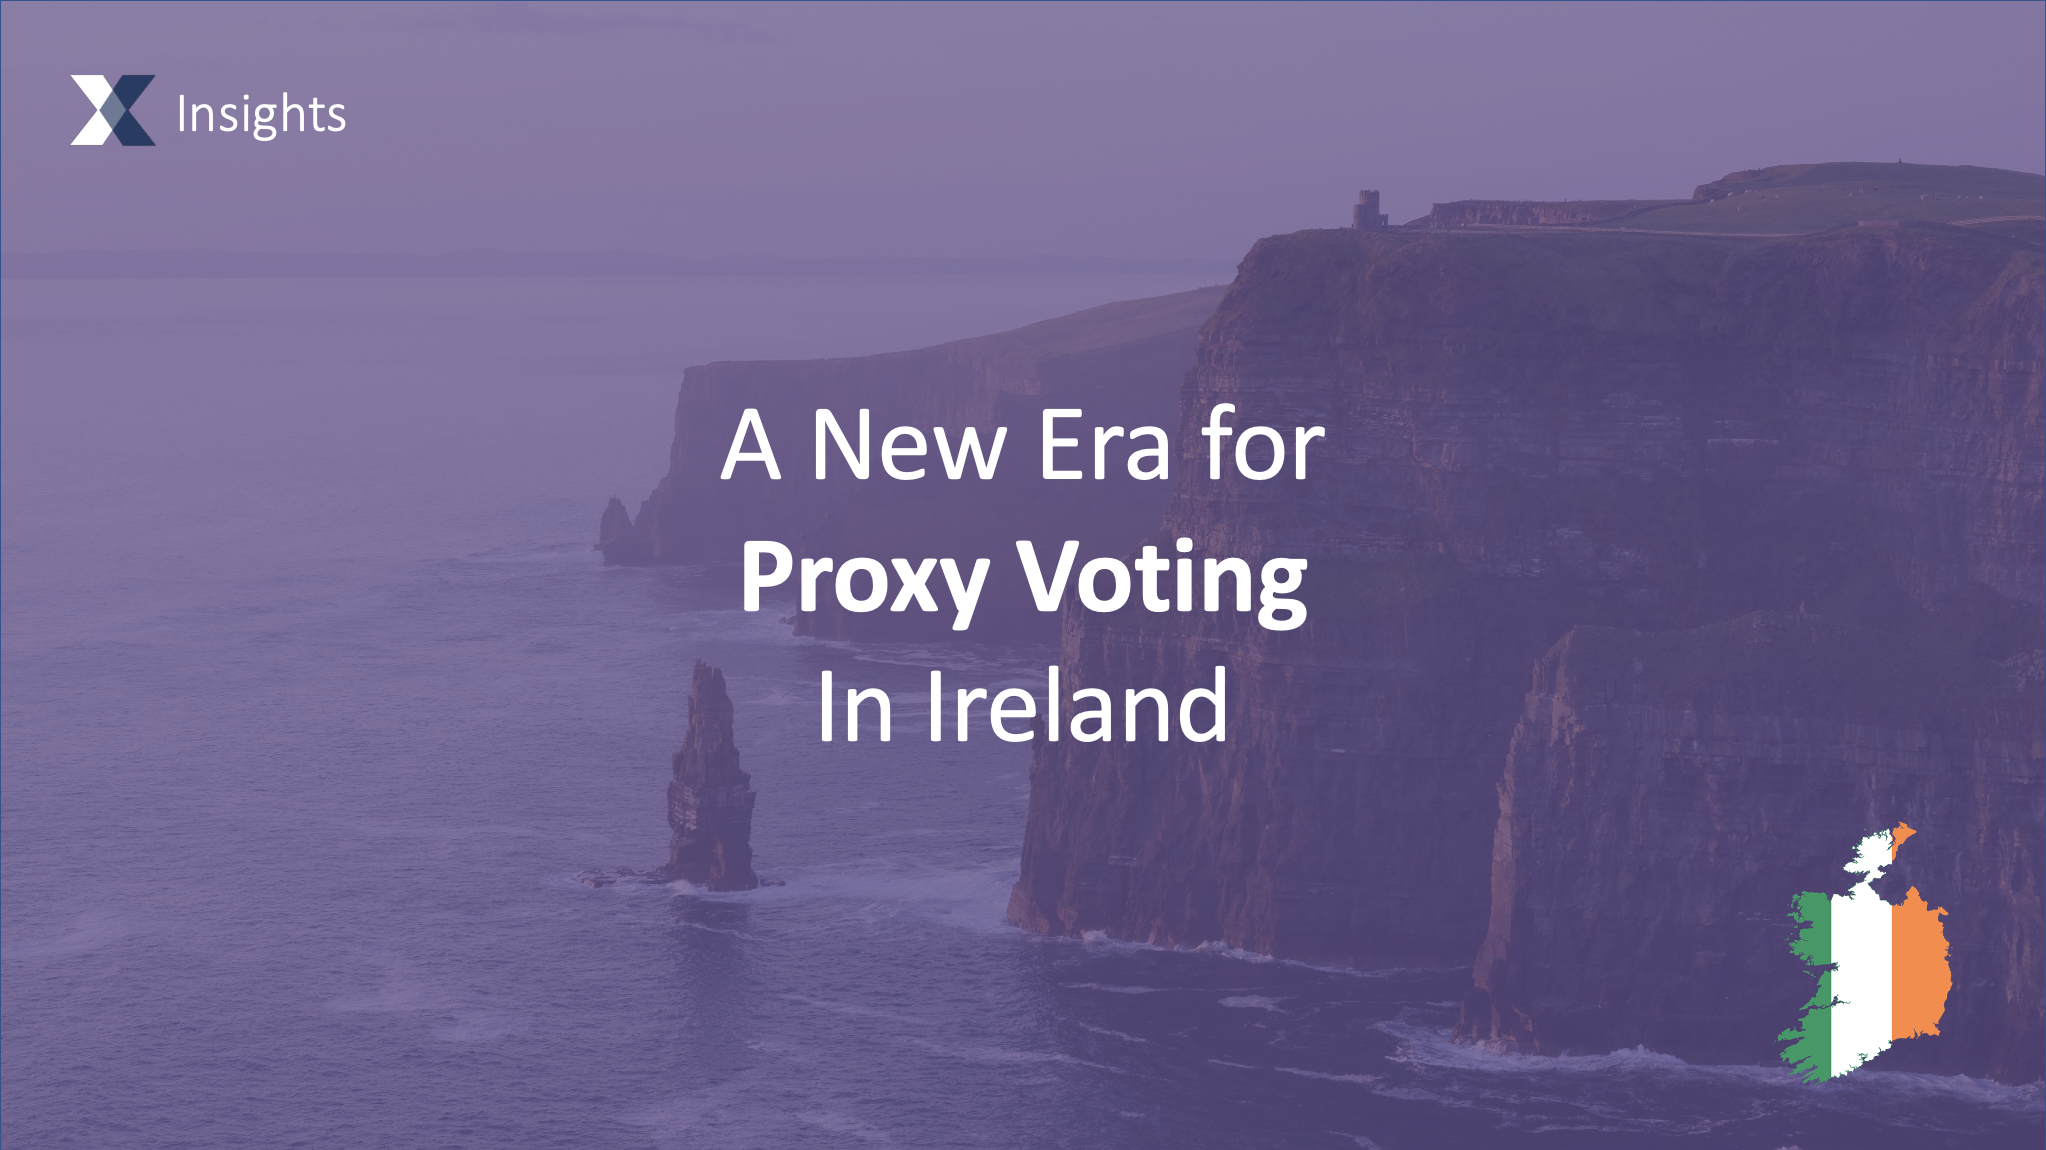 A New Era for Proxy Voting in Ireland